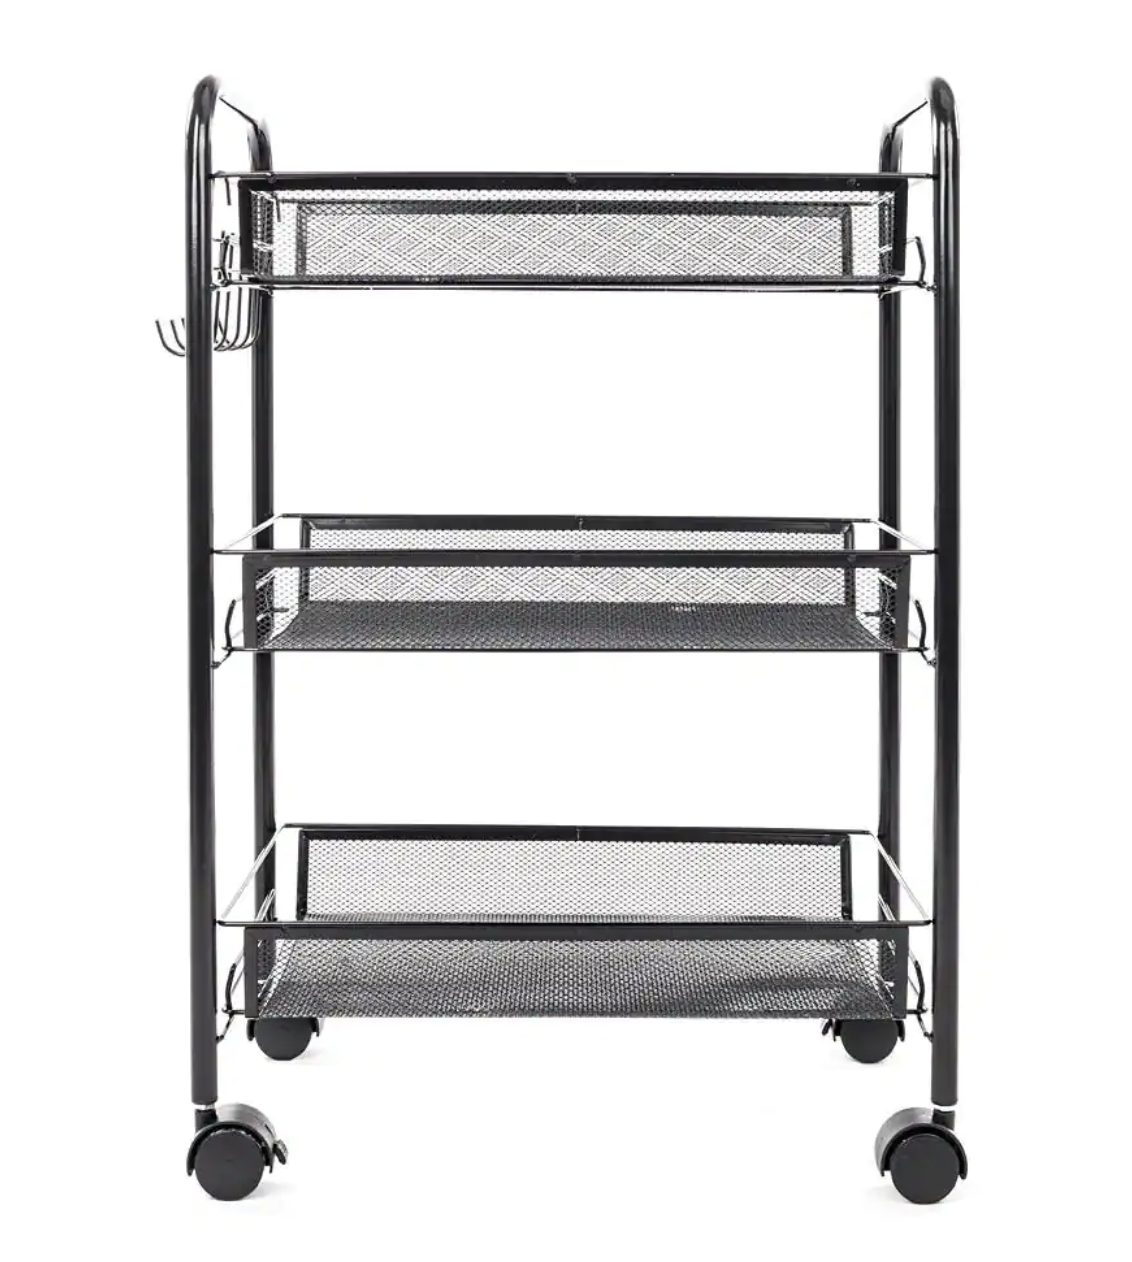 Storage Solution Sale: 3-Tier Steel Wire Shelving Unit $28, 27 Gal. Storage Tote $12 & More + Free Store Pickup